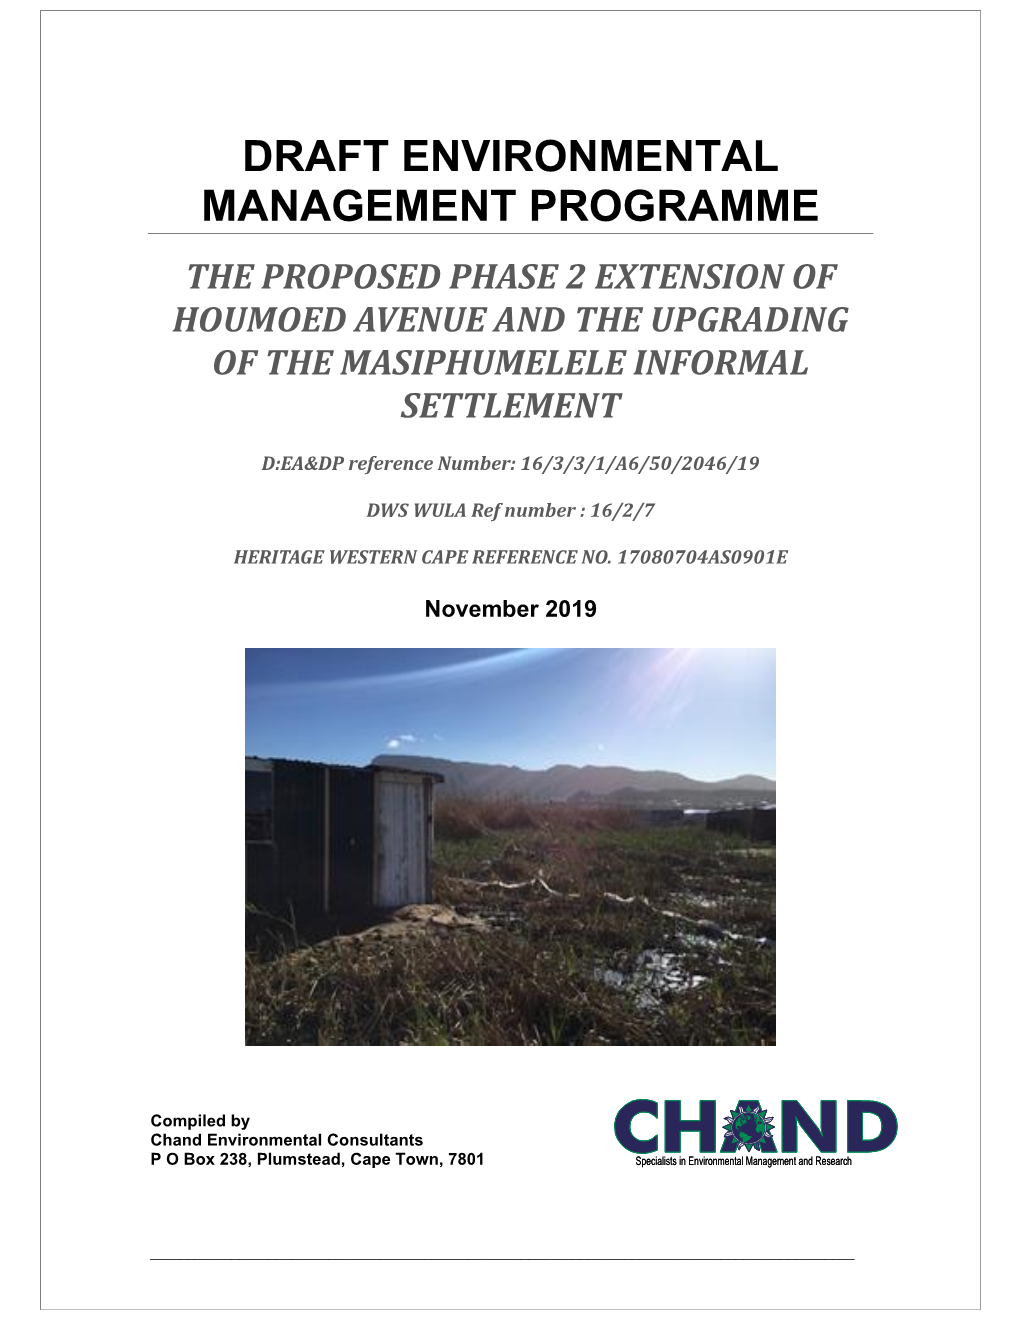 Draft Environmental Management Programme the Proposed Phase 2 Extension of Houmoed Avenue and the Upgrading of the Masiphumelele Informal Settlement